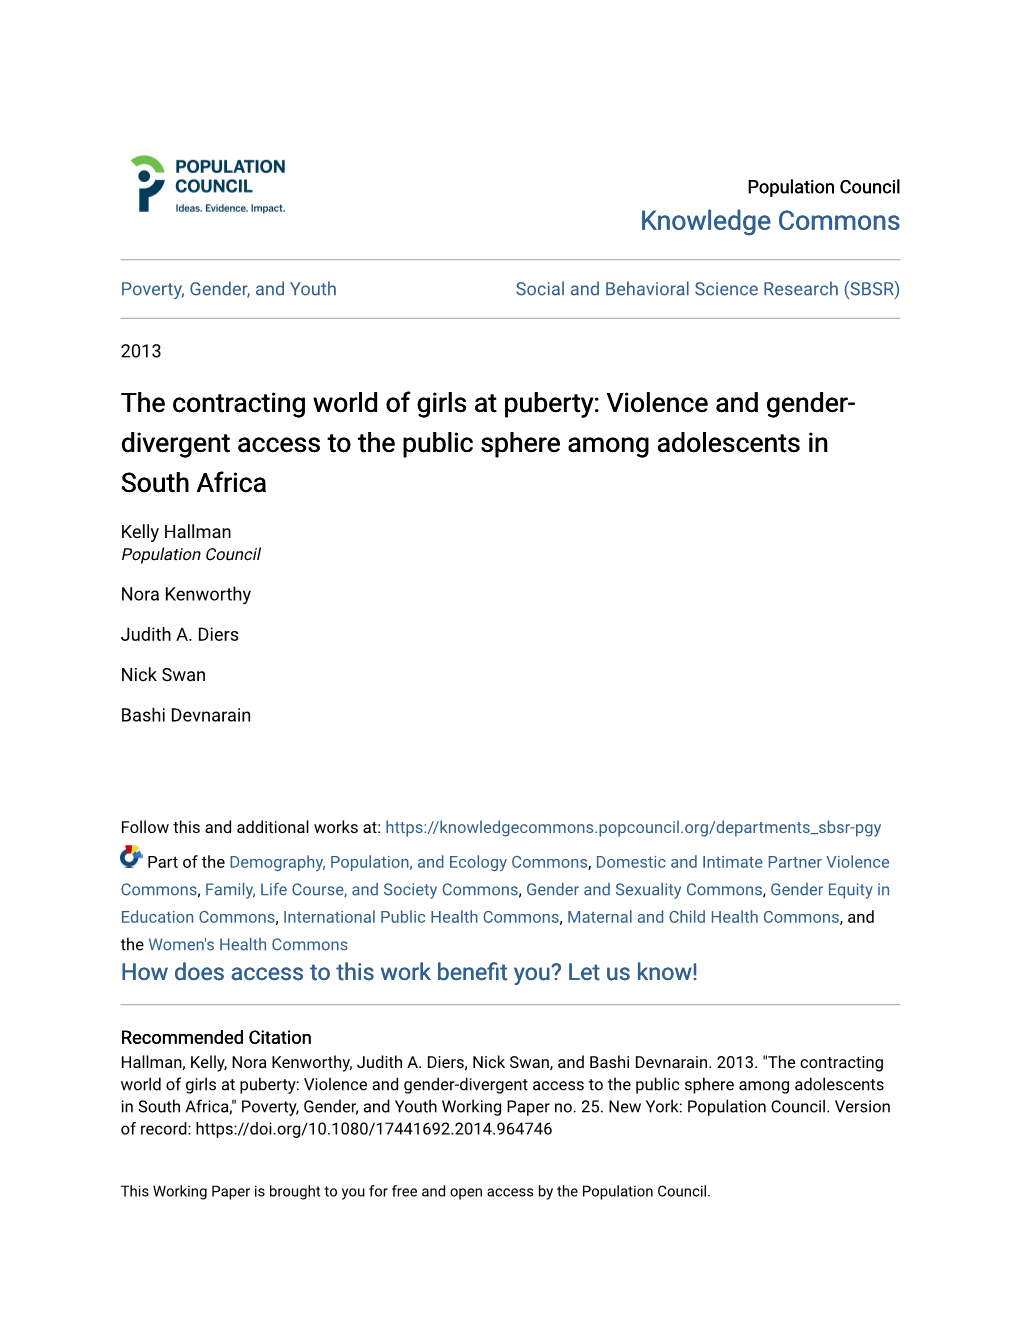 The Contracting World of Girls at Puberty: Violence and Gender- Divergent Access to the Public Sphere Among Adolescents in South Africa